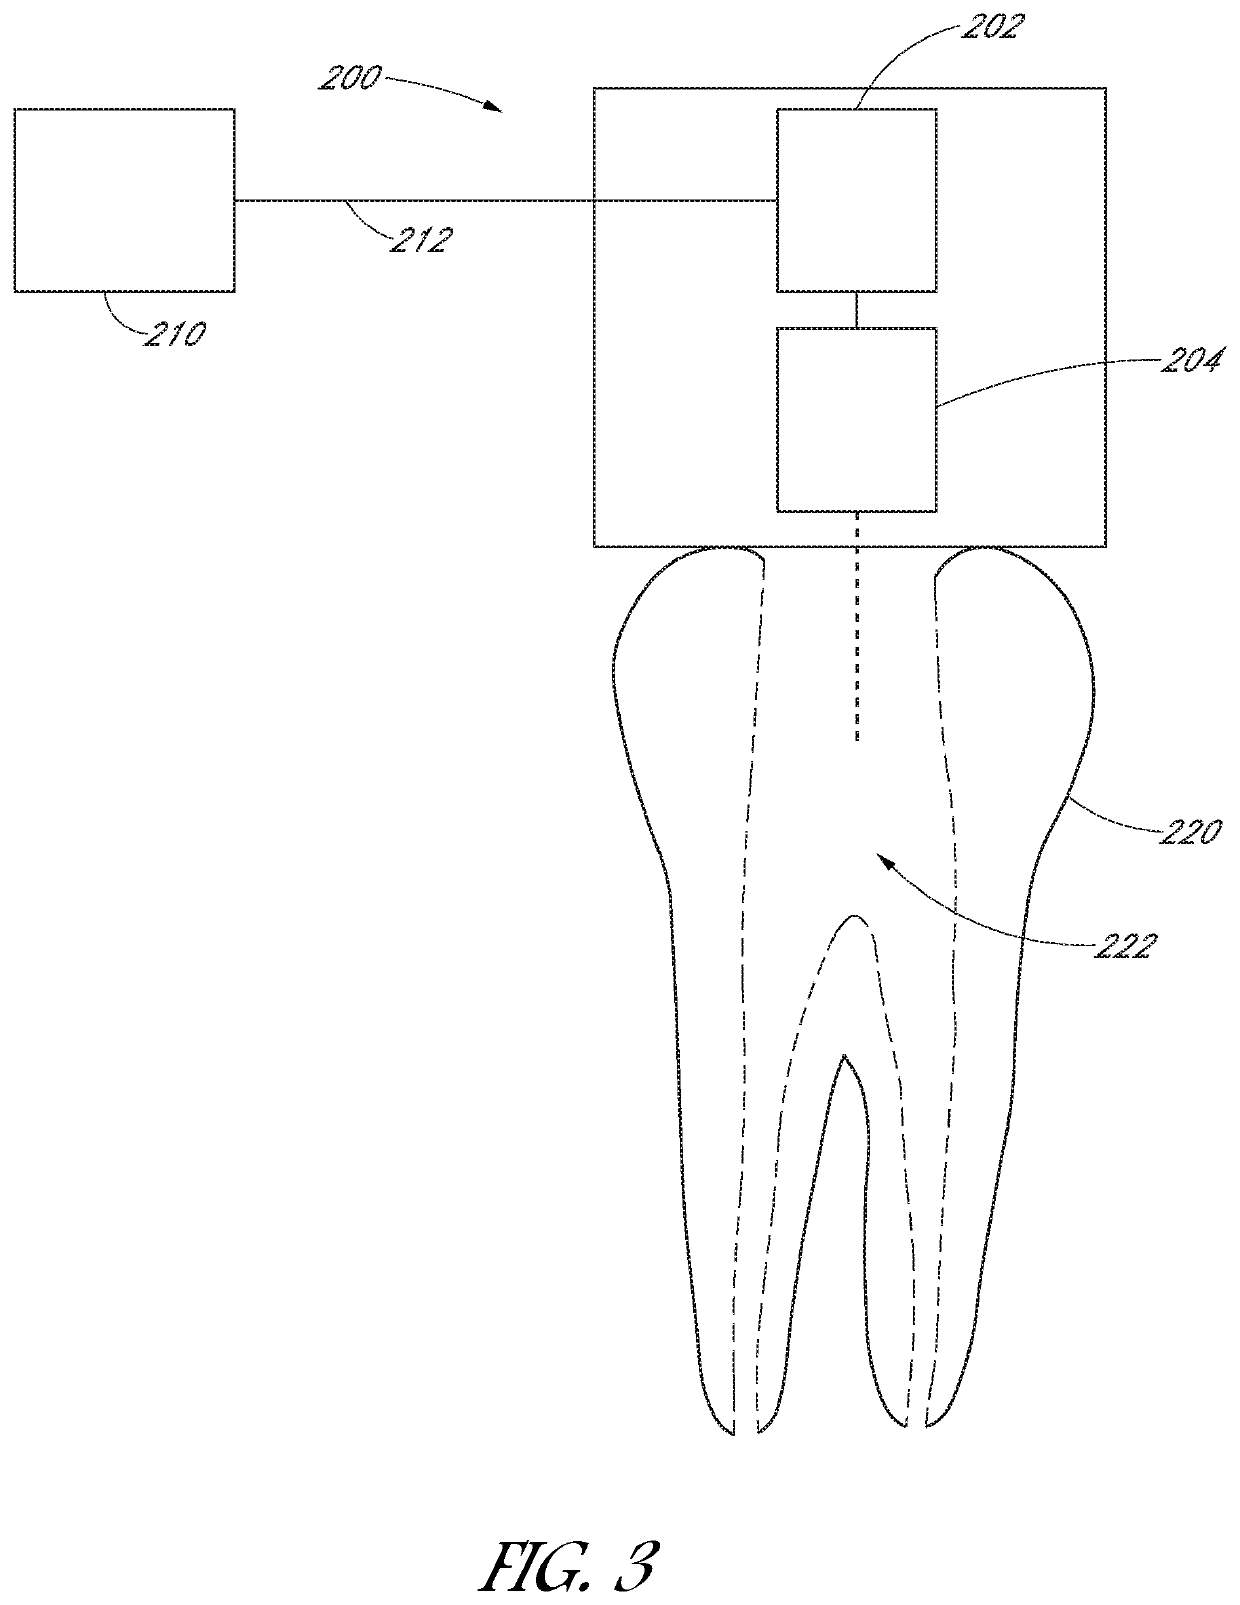 Apparatus and method for treating teeth